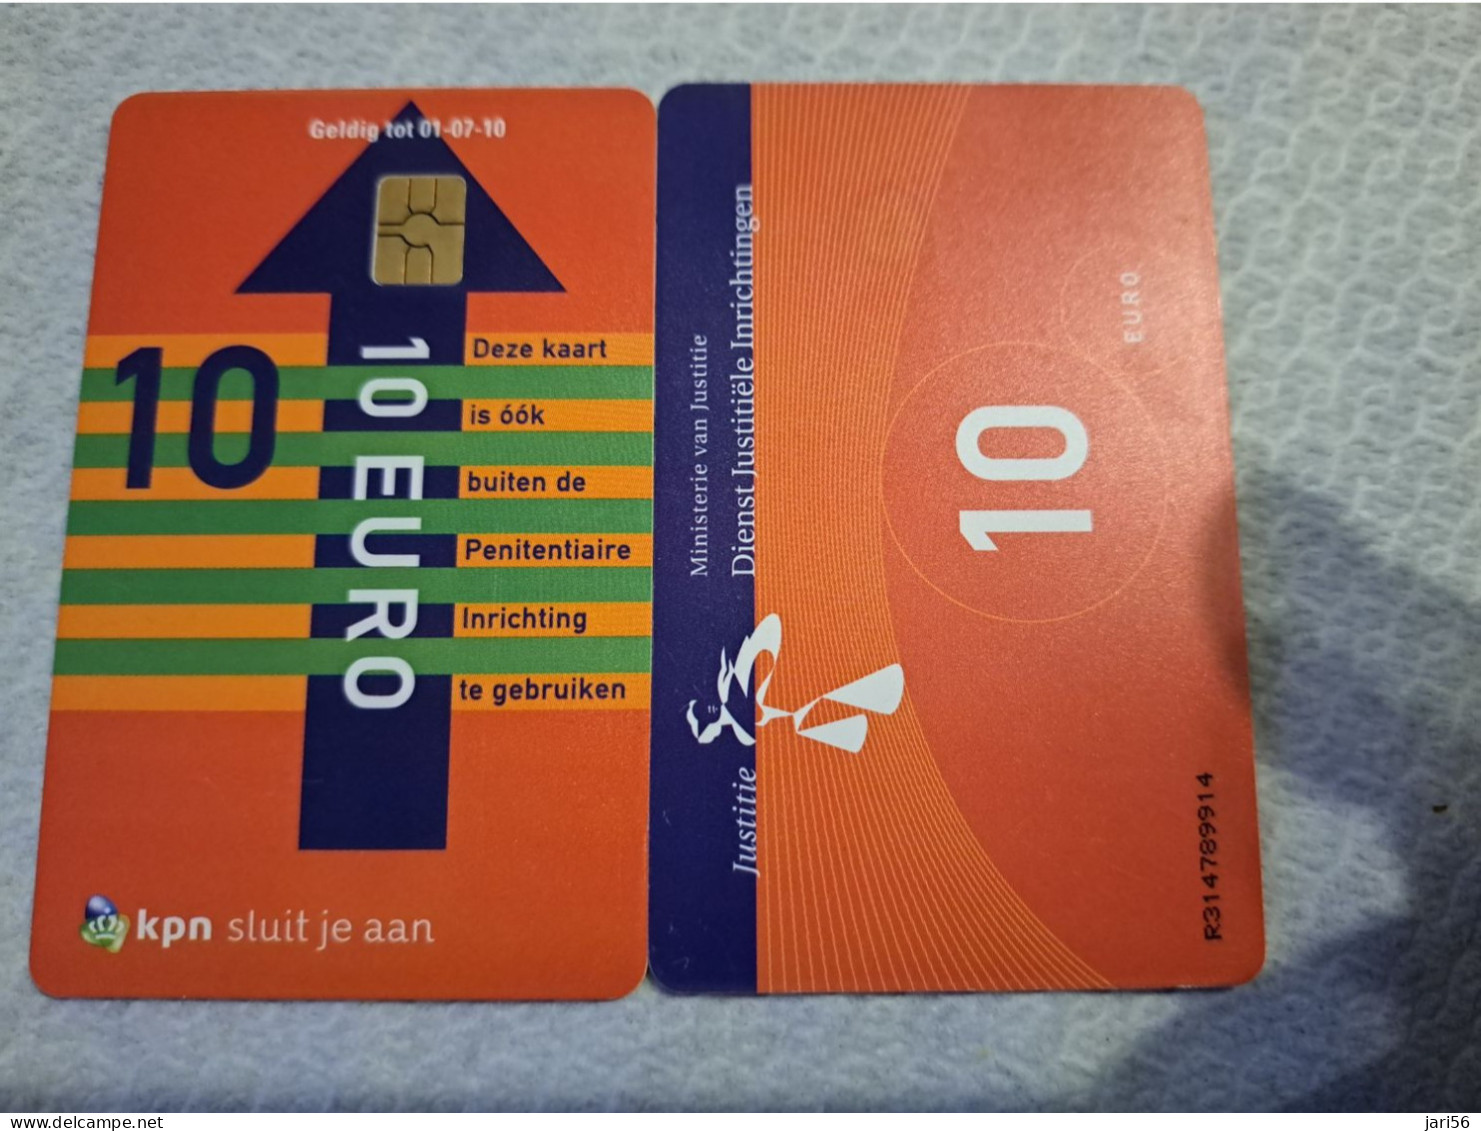 NETHERLANDS   € 10,-   / USED  / DATE  01-07-10  JUSTITIE/PRISON CARD  CHIP CARD/ USED   ** 16163** - [3] Sim Cards, Prepaid & Refills